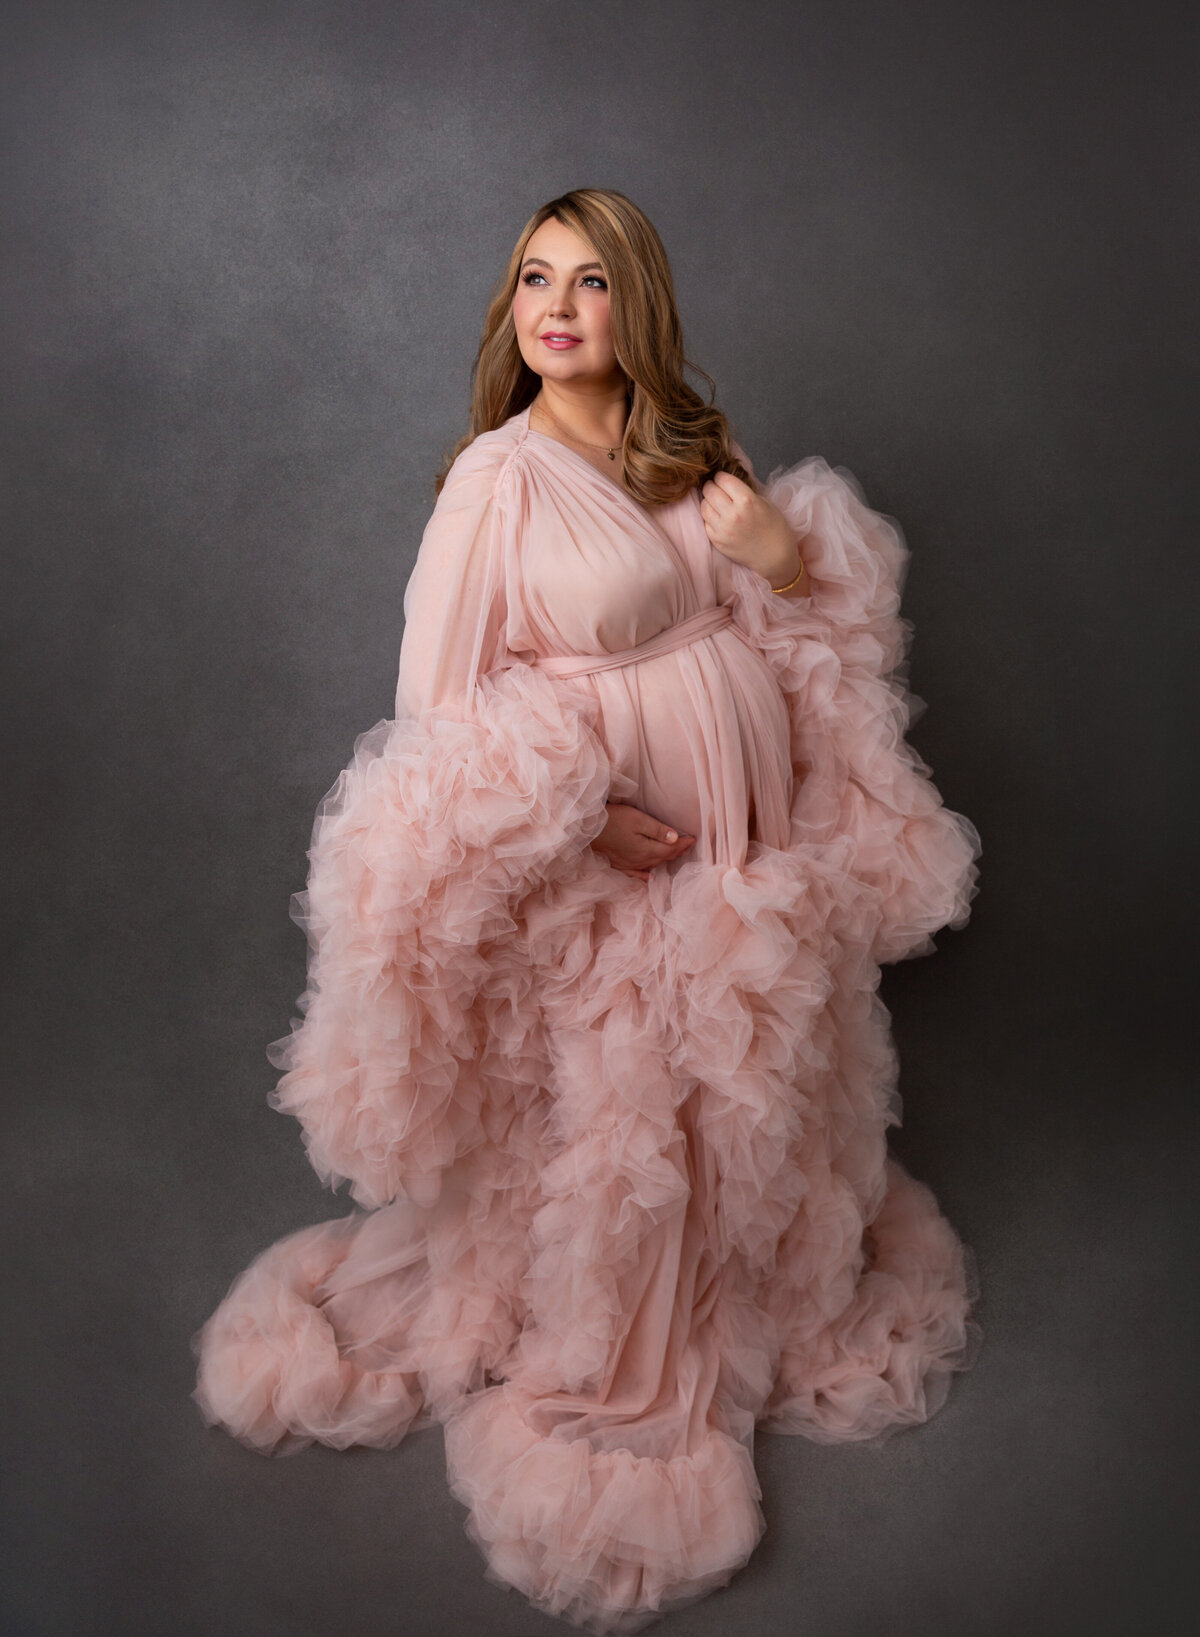 Maternity picturs for mom wearing a pink dress in Brooklyn NYC  studio